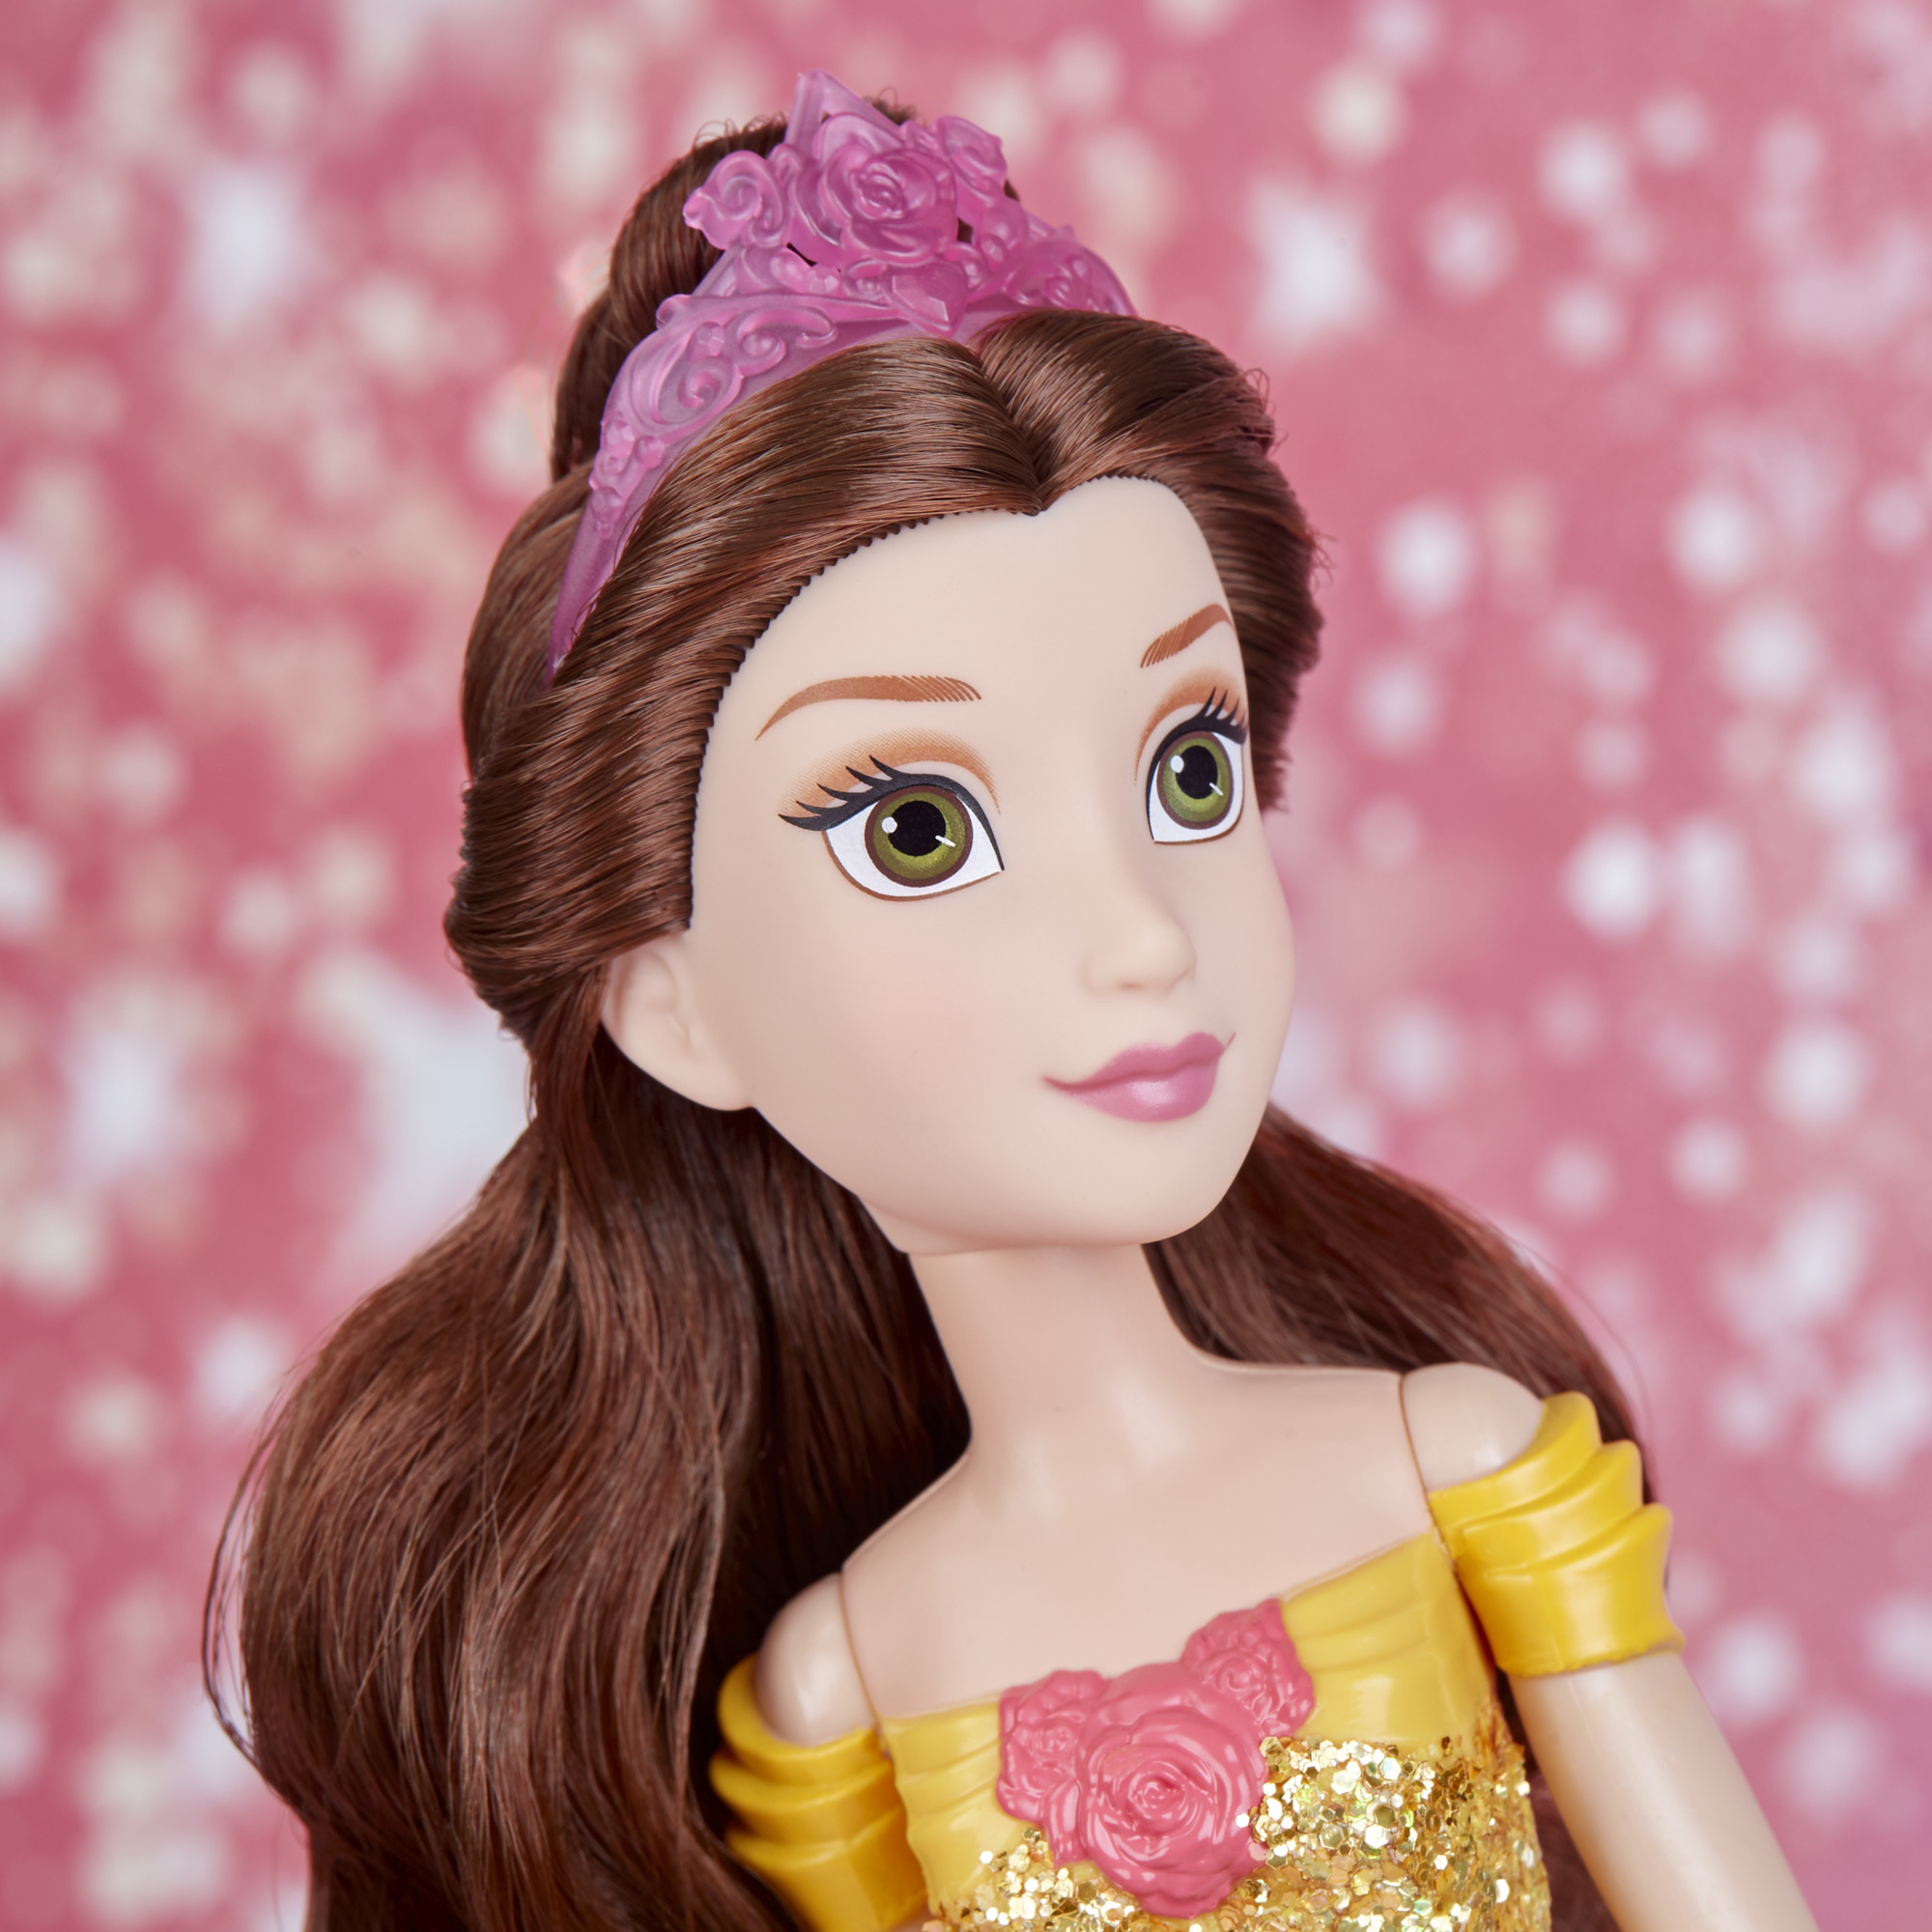 Disney Princess Royal Shimmer Belle with Sparkly Skirt, Includes Tiara and Shoes - image 14 of 16